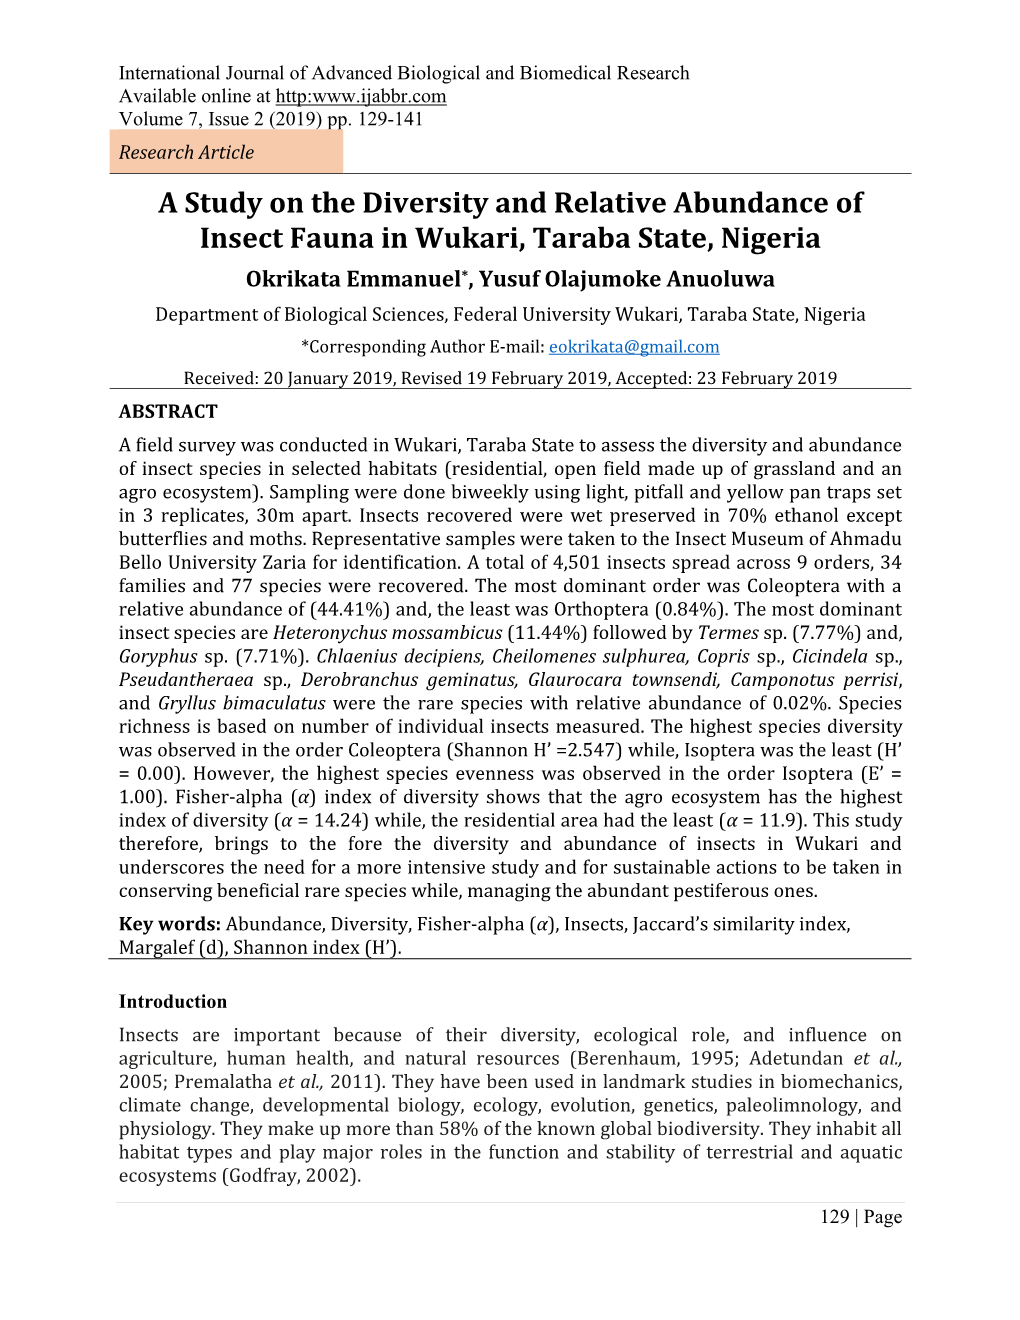 A Study on the Diversity and Relative Abundance of Insect Fauna In